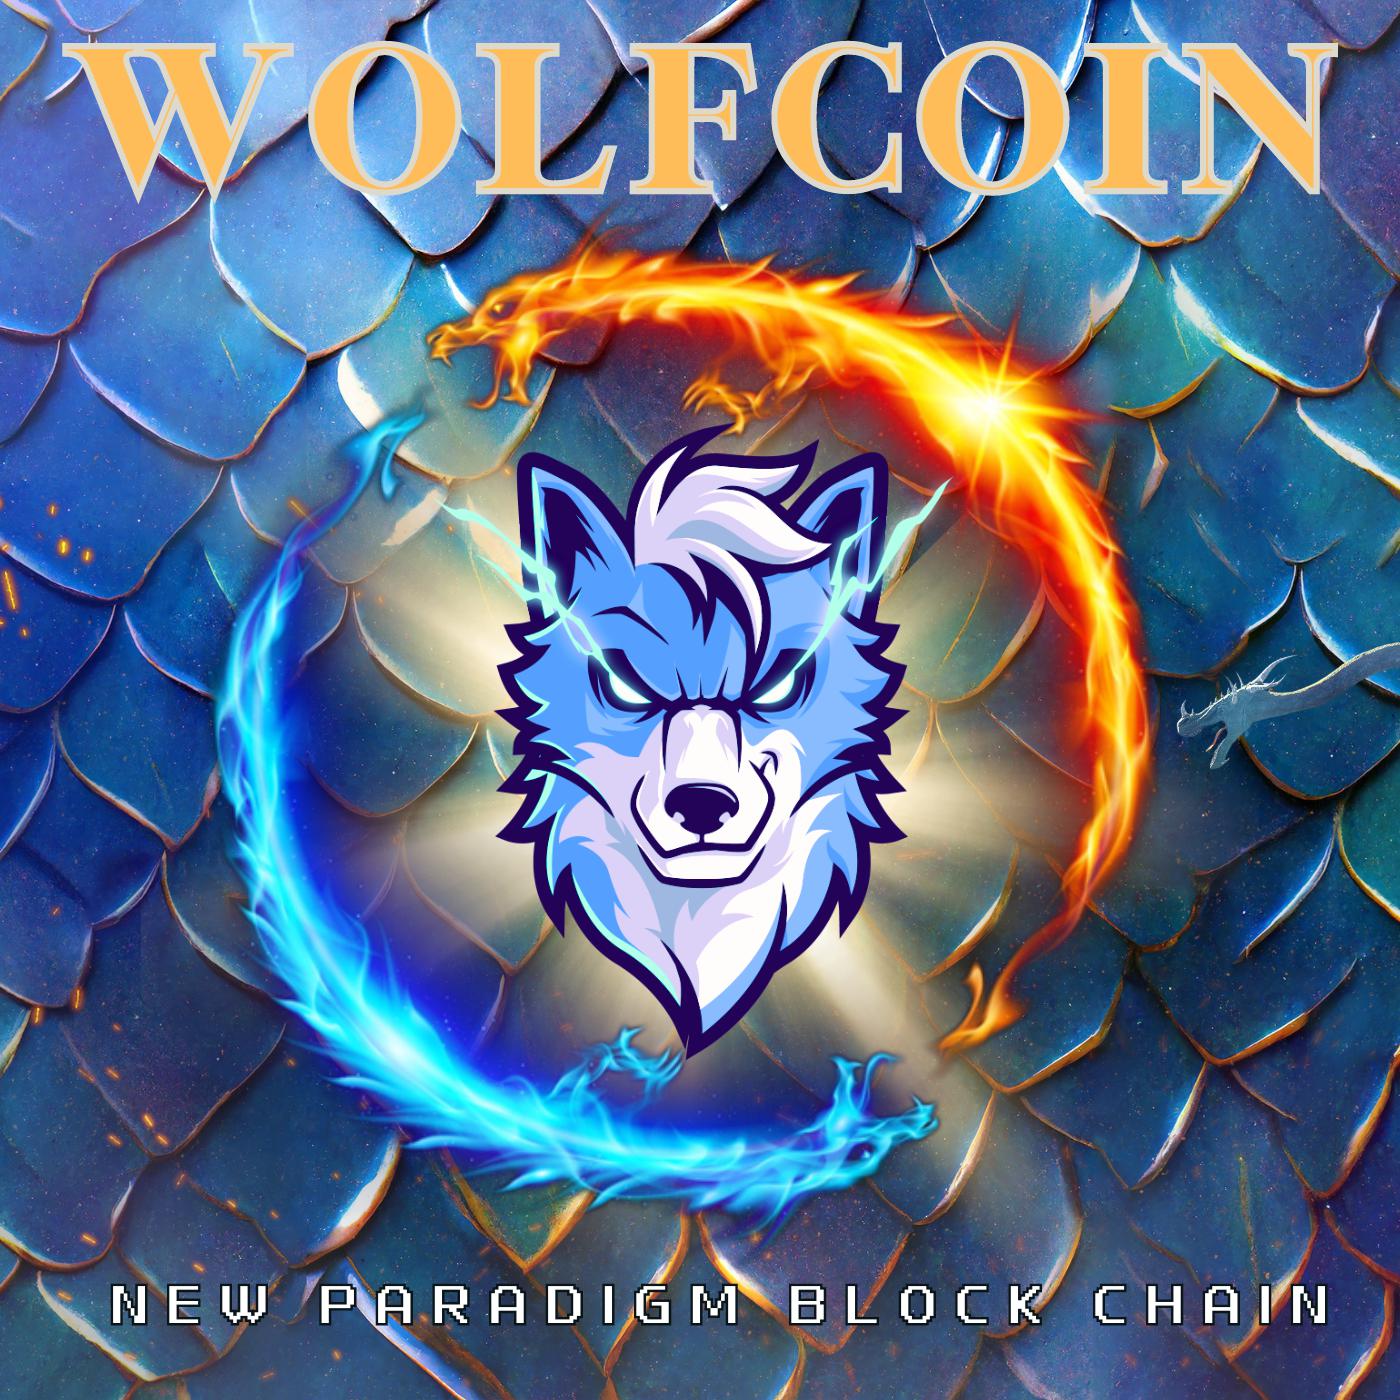 WOLFCOIN WITH DRAGON.png.jpg